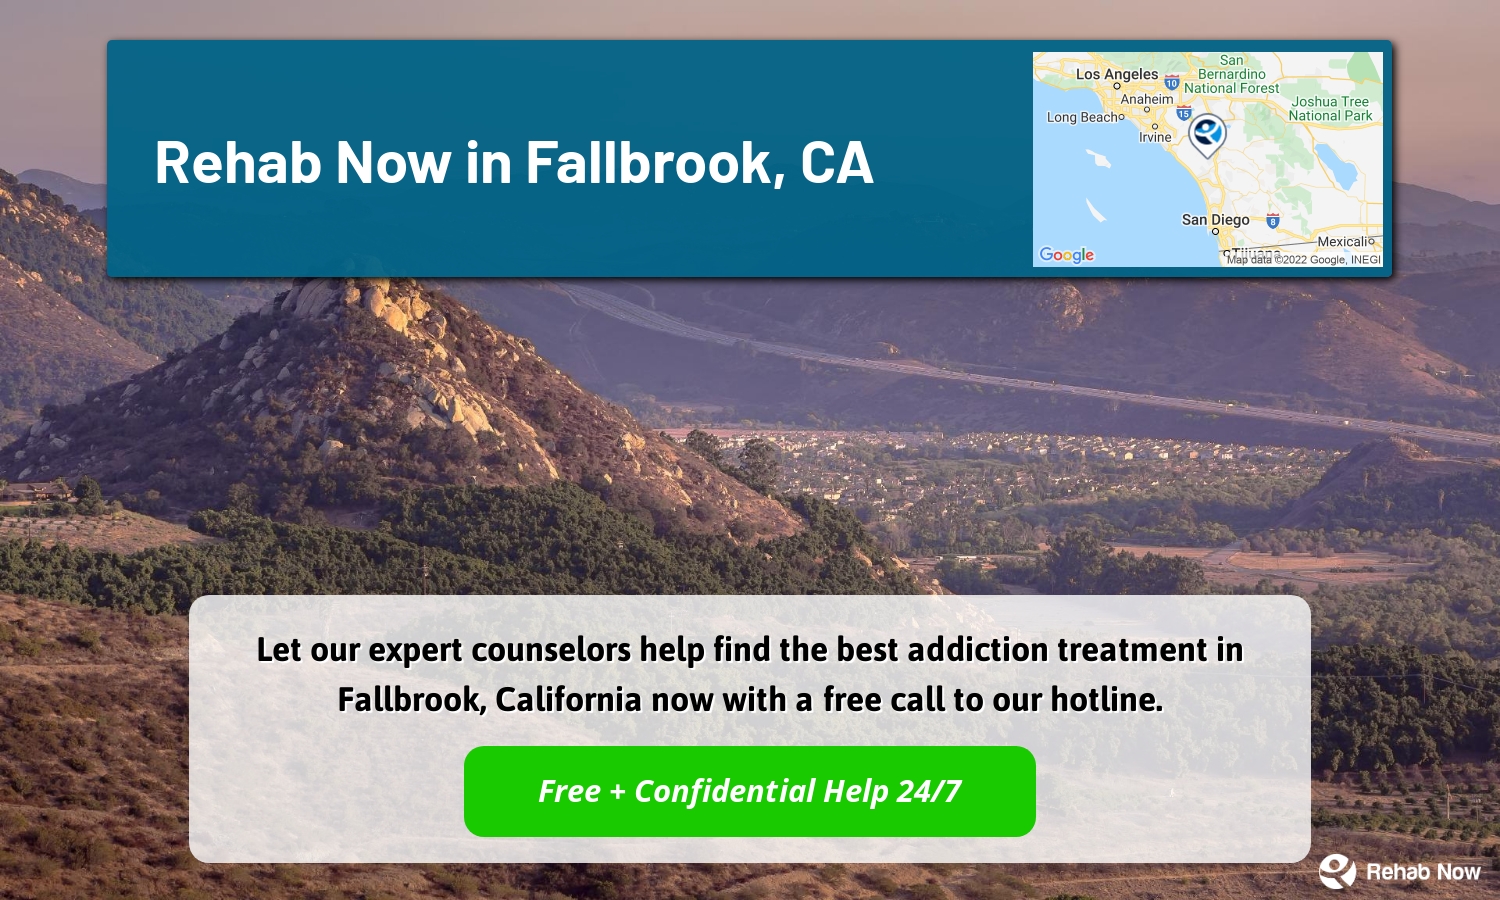 Let our expert counselors help find the best addiction treatment in Fallbrook, California now with a free call to our hotline.